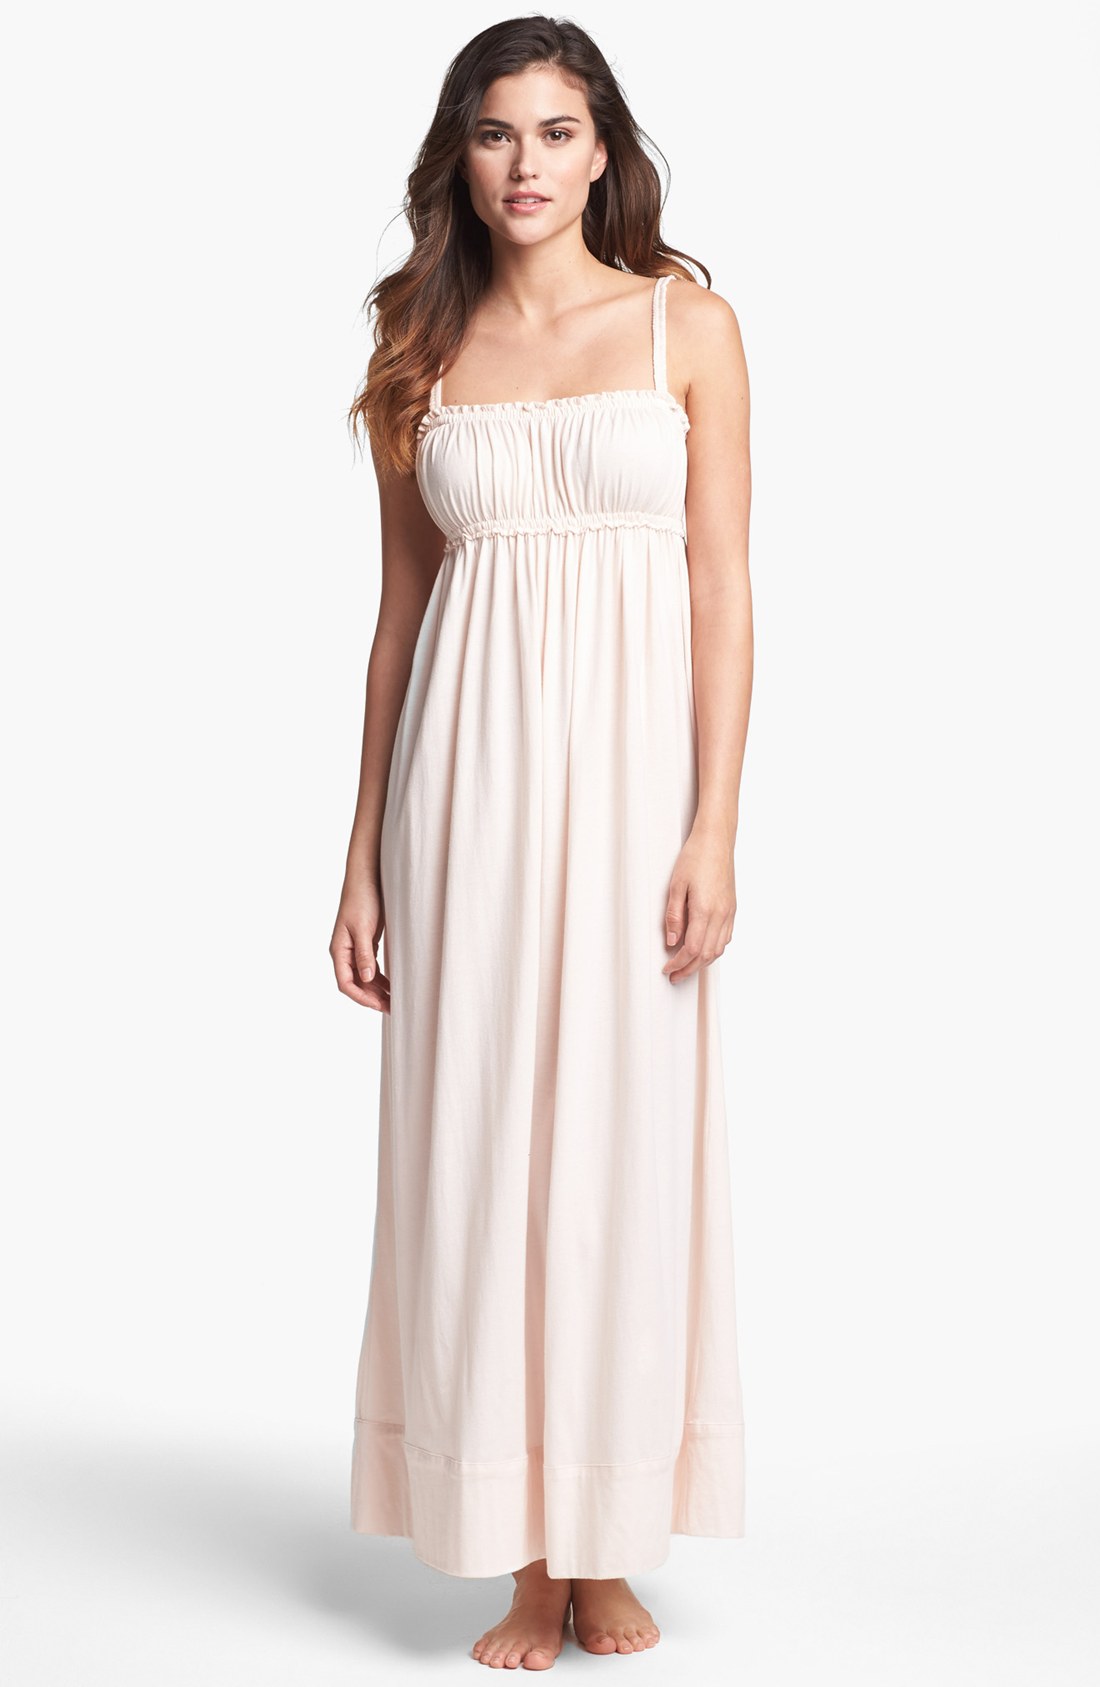 Donna Karan New York Casual Luxe Long Knit Nightgown in Beige (Blossom ...